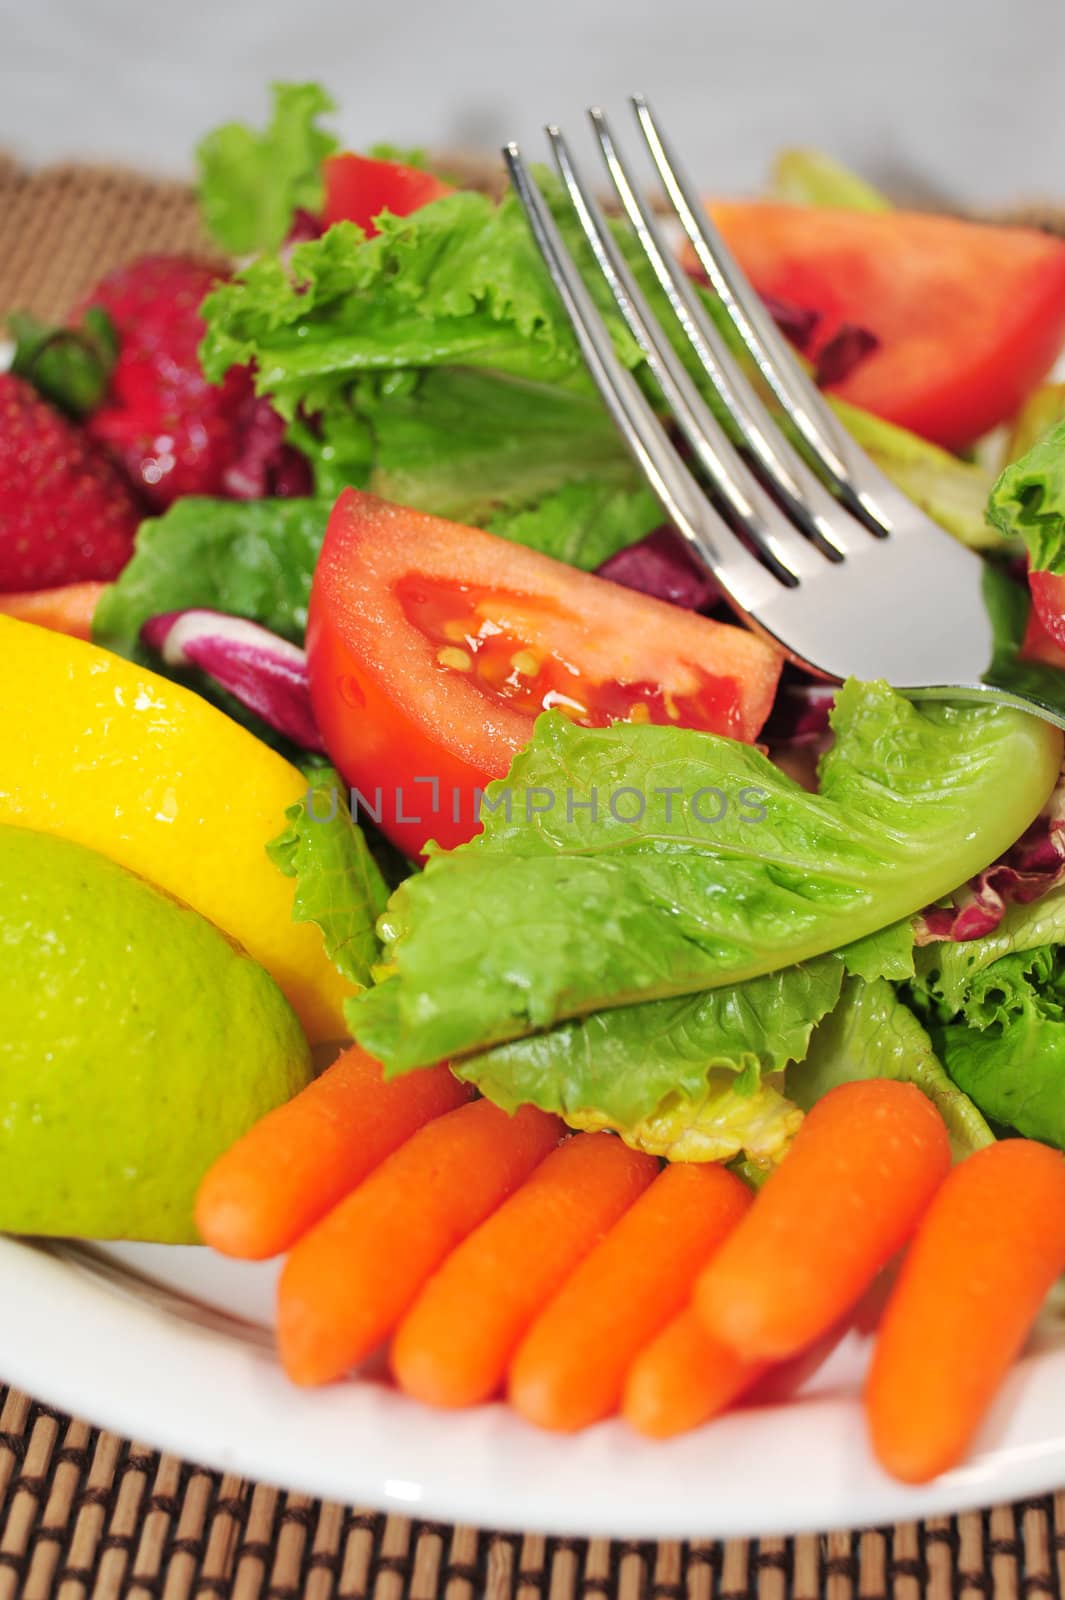 A Lite Salad with a mixture of lettuce, baby carrots, tomatoes with lemon and lime on a white salad plate and designer place mat.